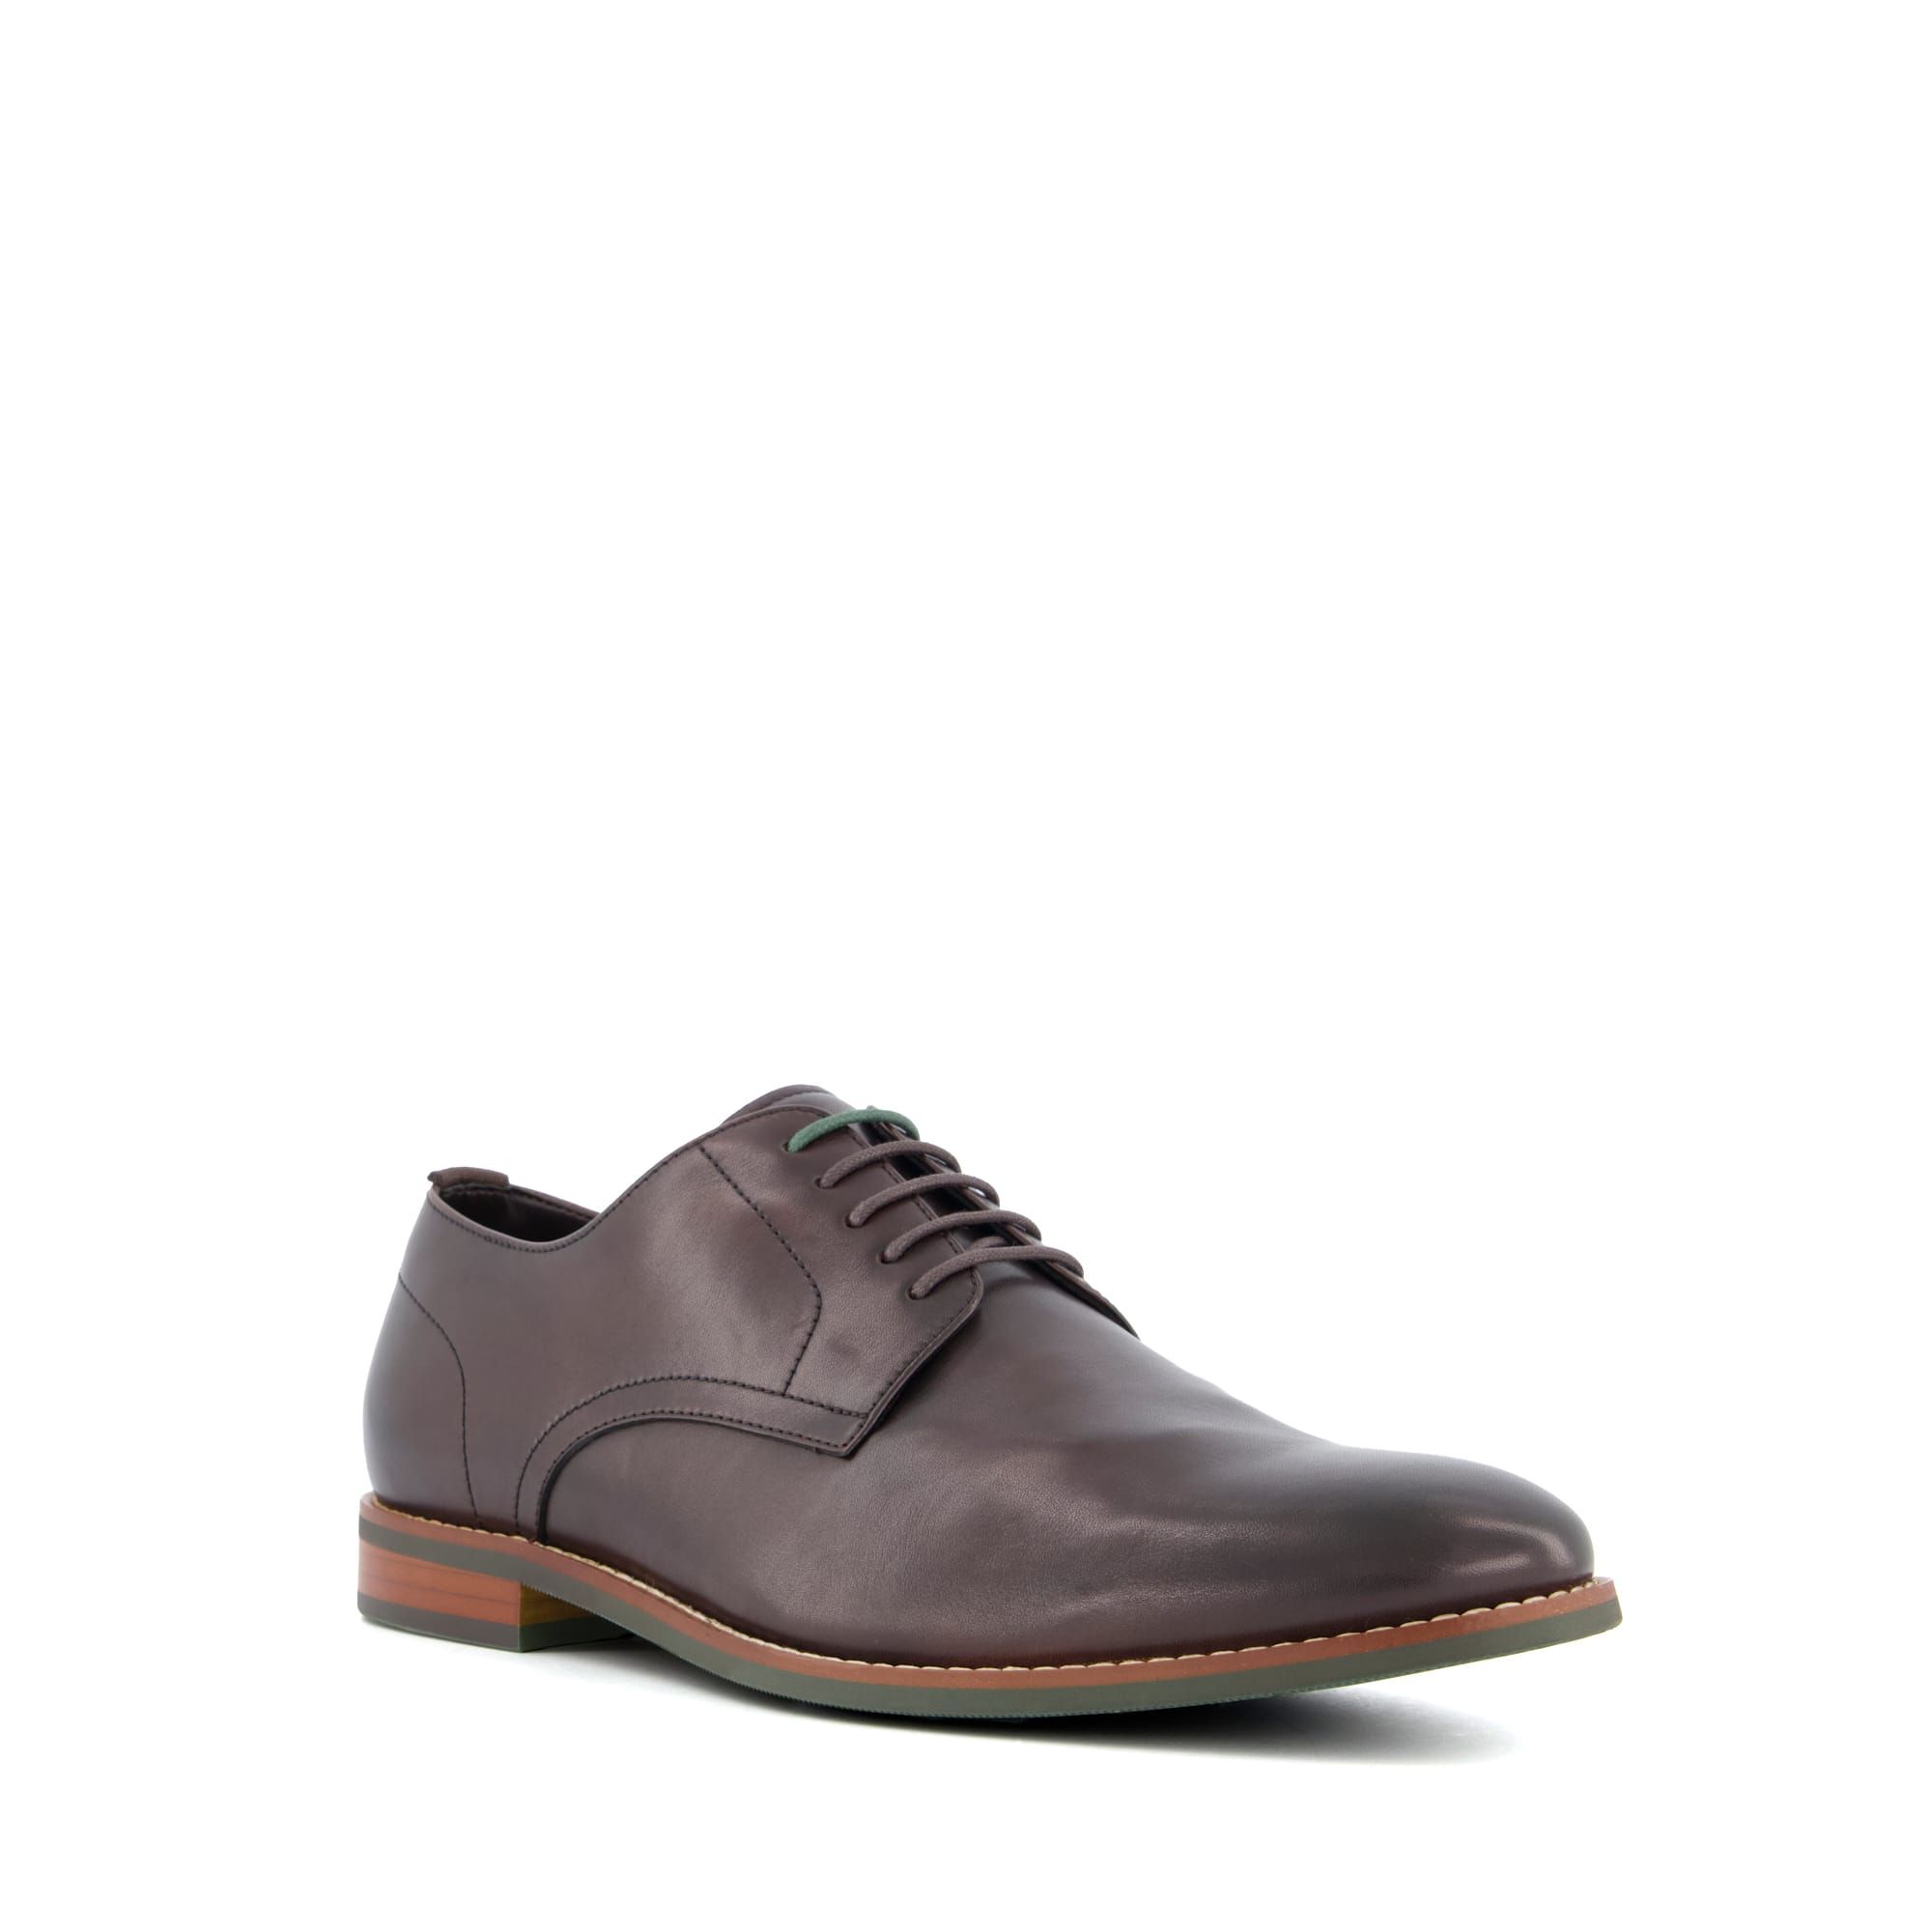 Refine your formal edit with our Suffolks Gibson shoes. Meticulously crafted from genuine leather, they feature classic top-stitch detailing along with two lace colourways to choose from